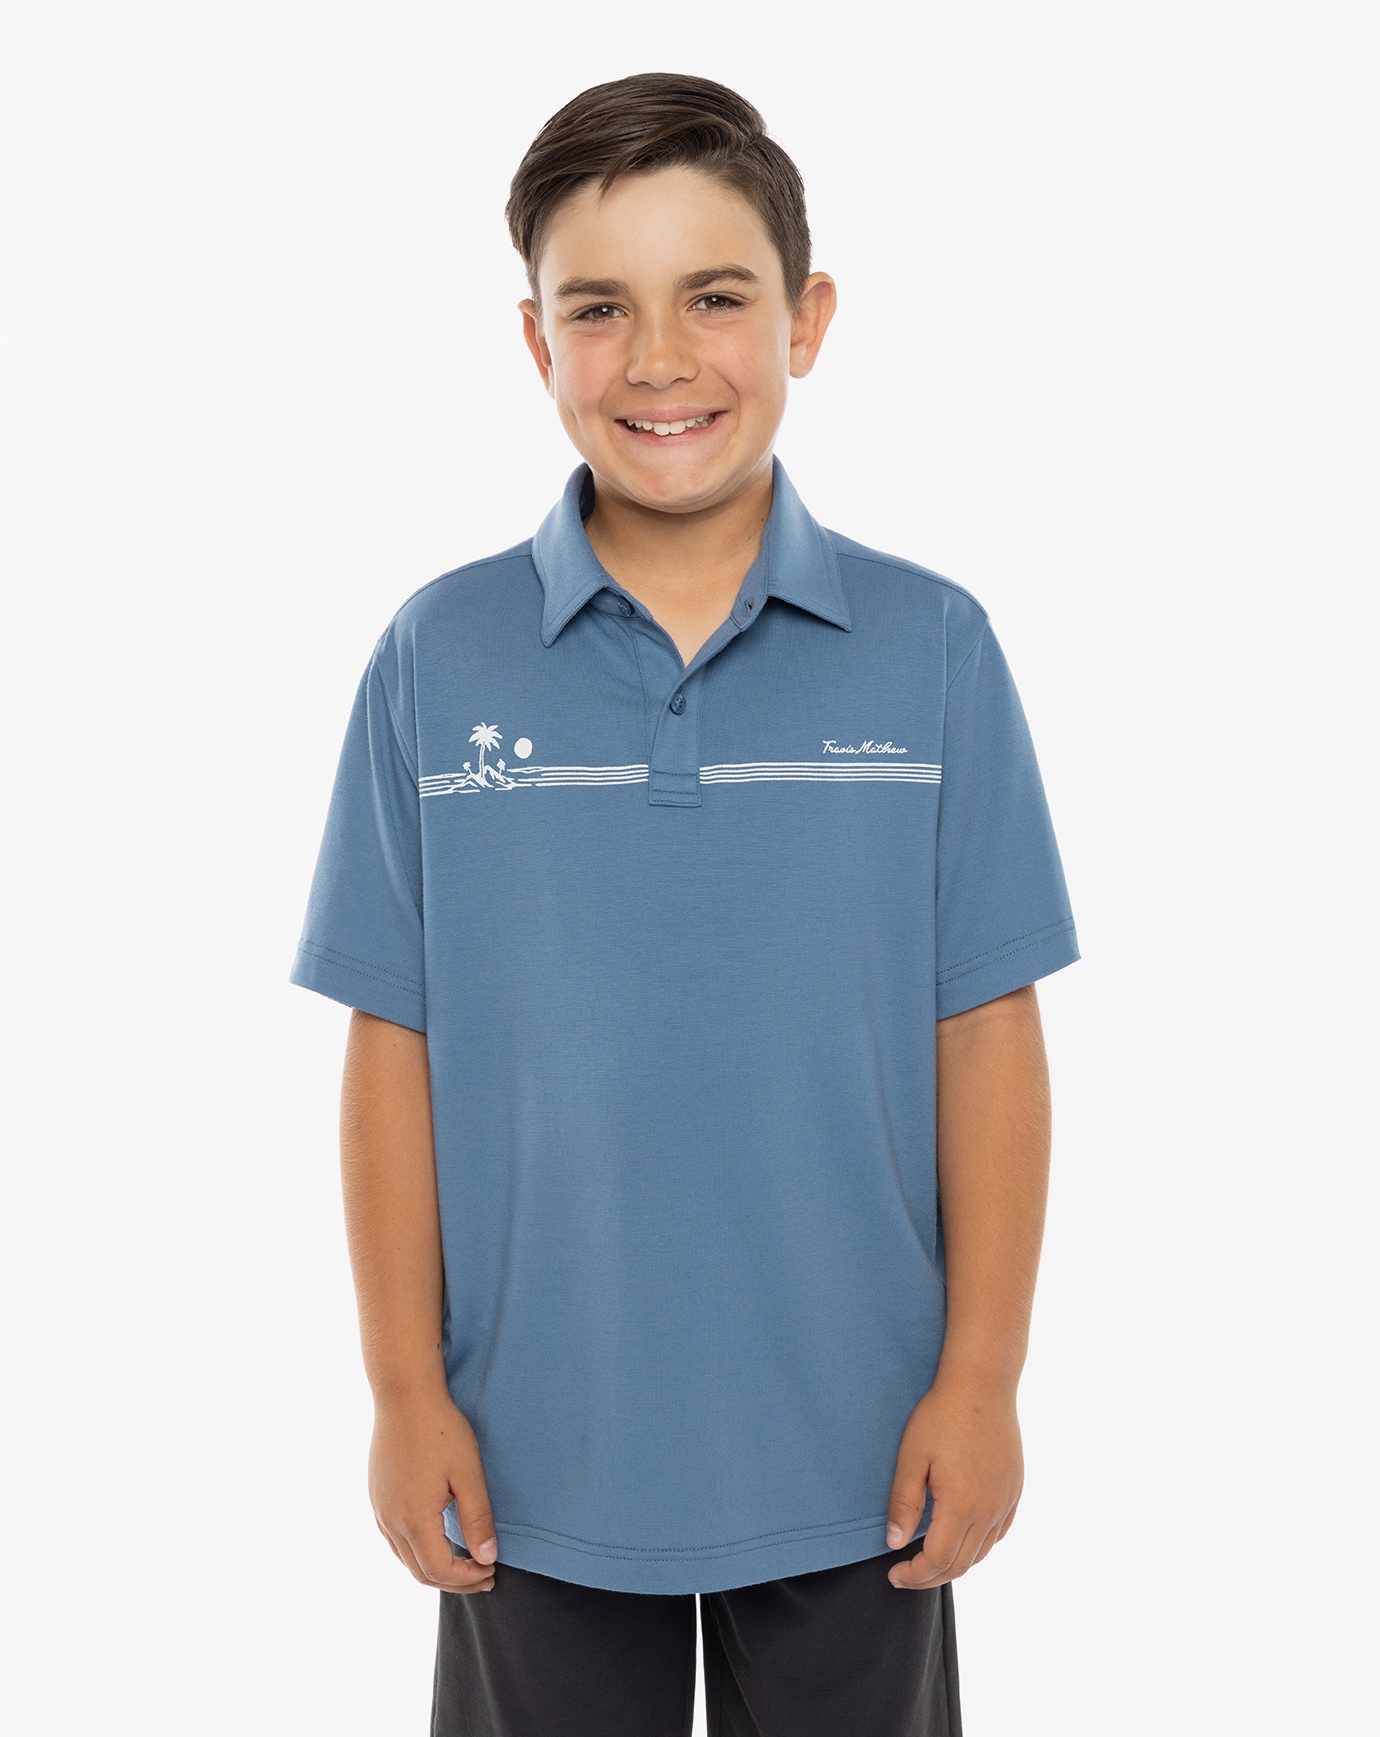 Related Product - BRIGHT SUN YOUTH POLO